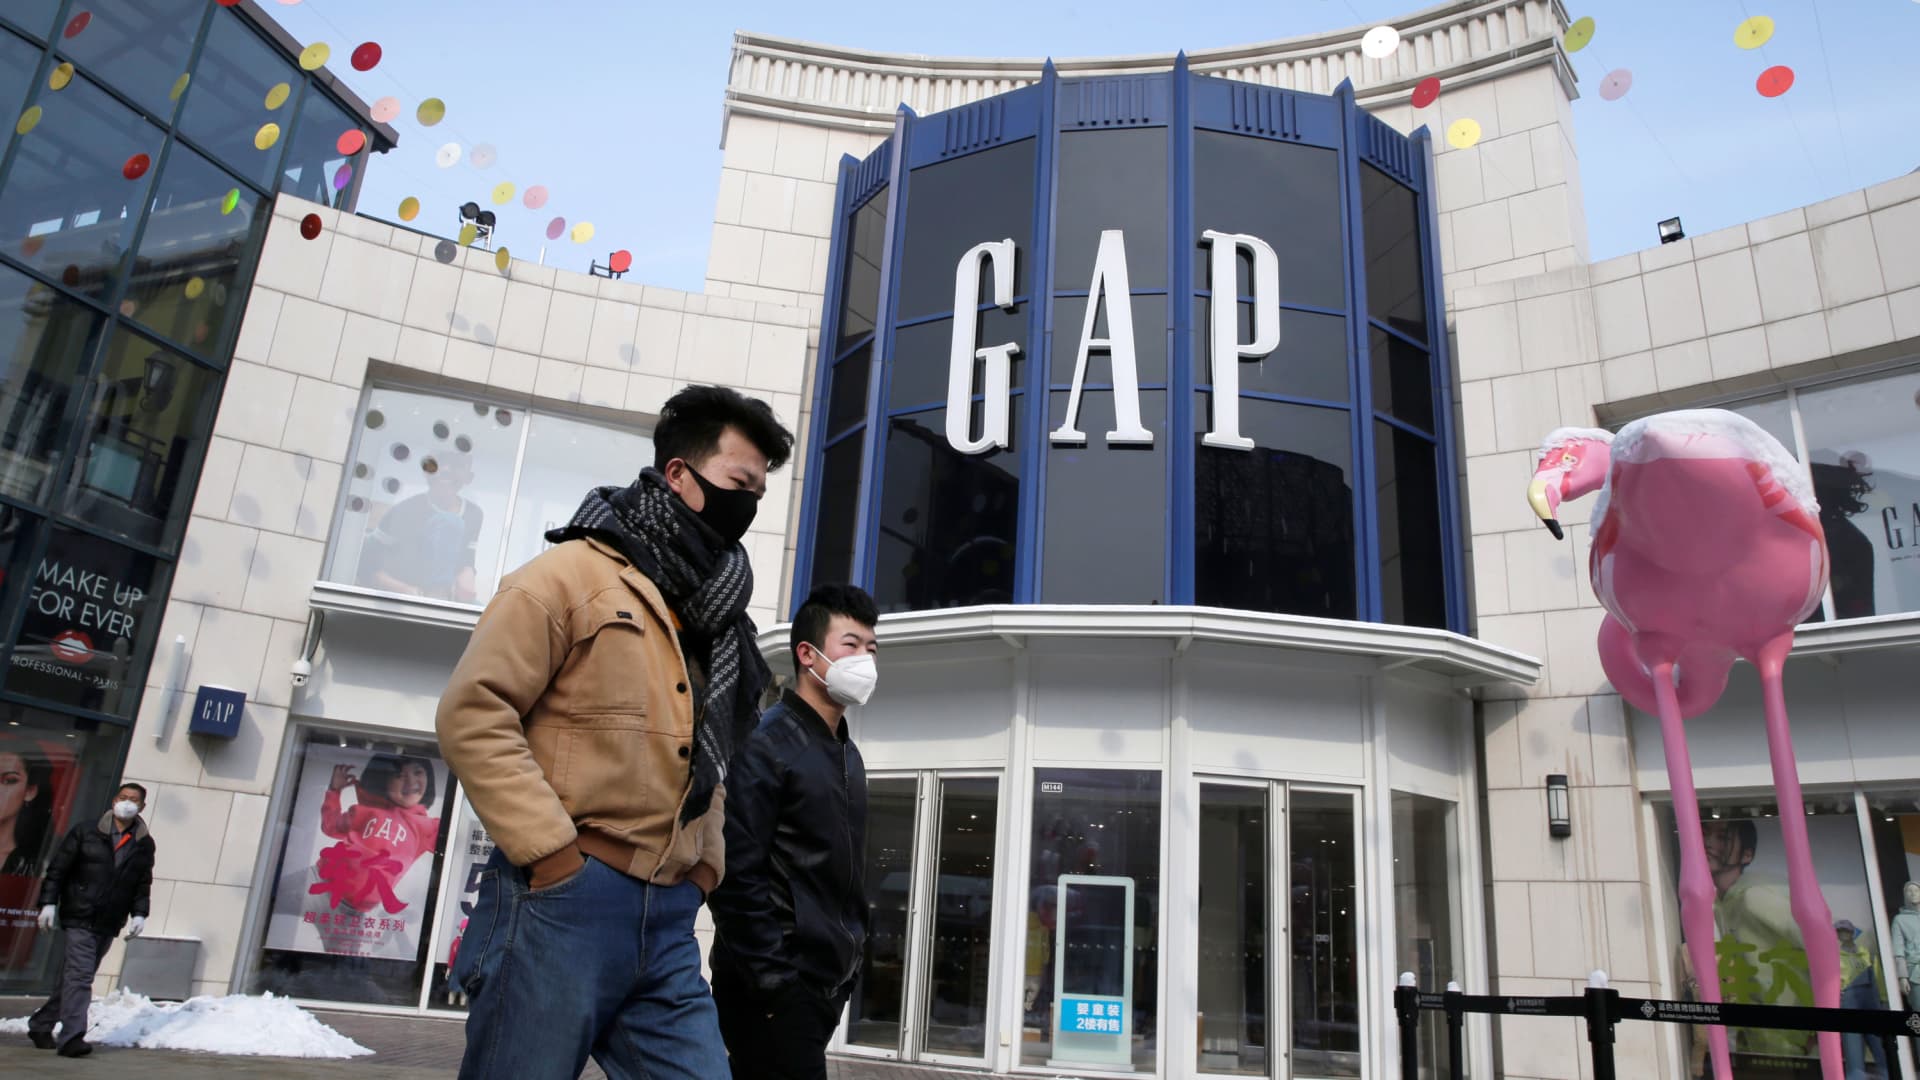 Morgan Stanley downgrades Gap after weak first-quarter report, says stock has further downside